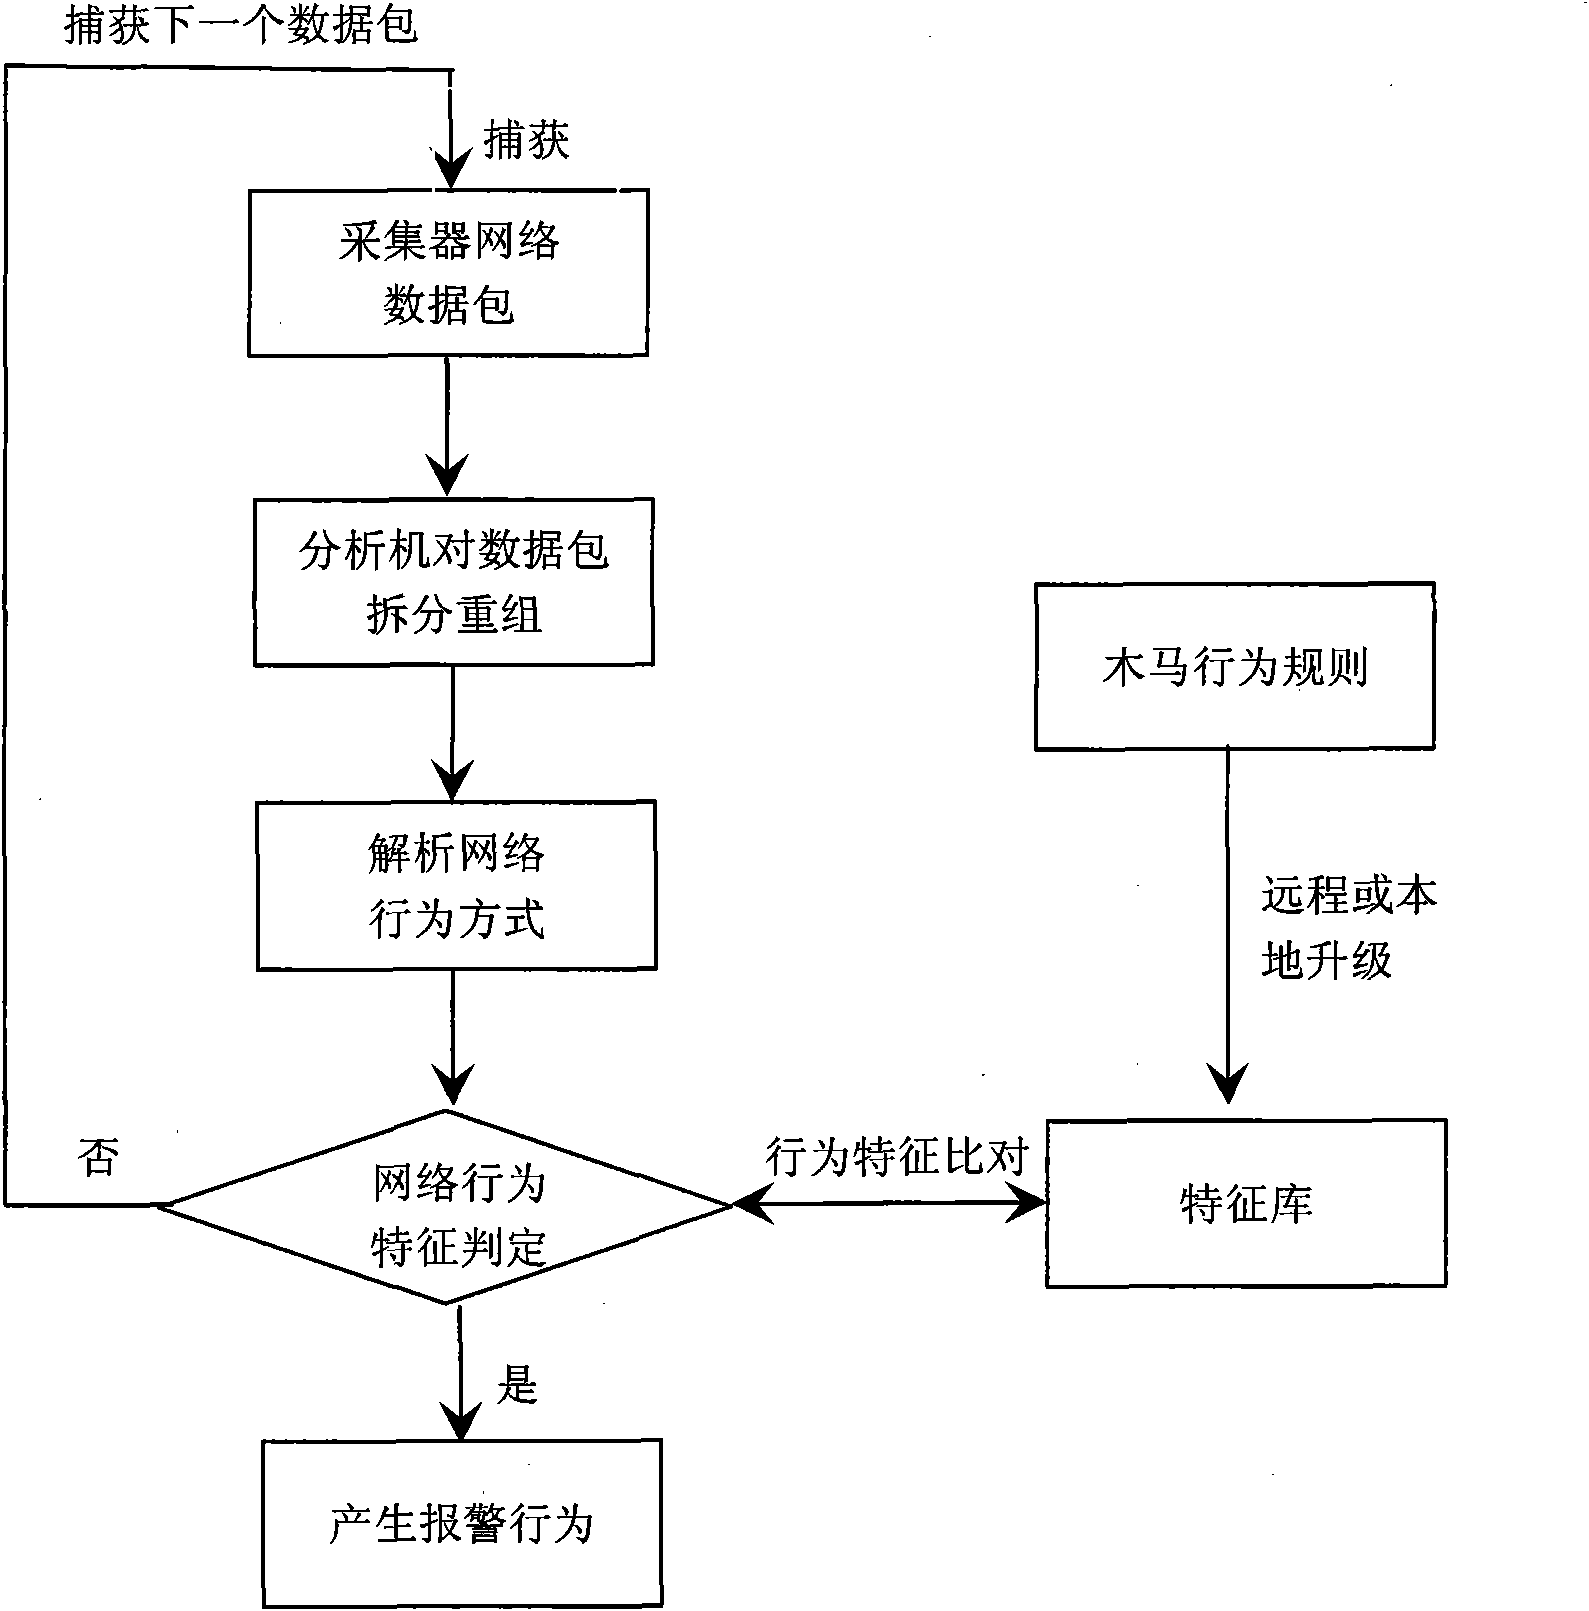 Method and device for detecting Trojans by analyzing network behaviors